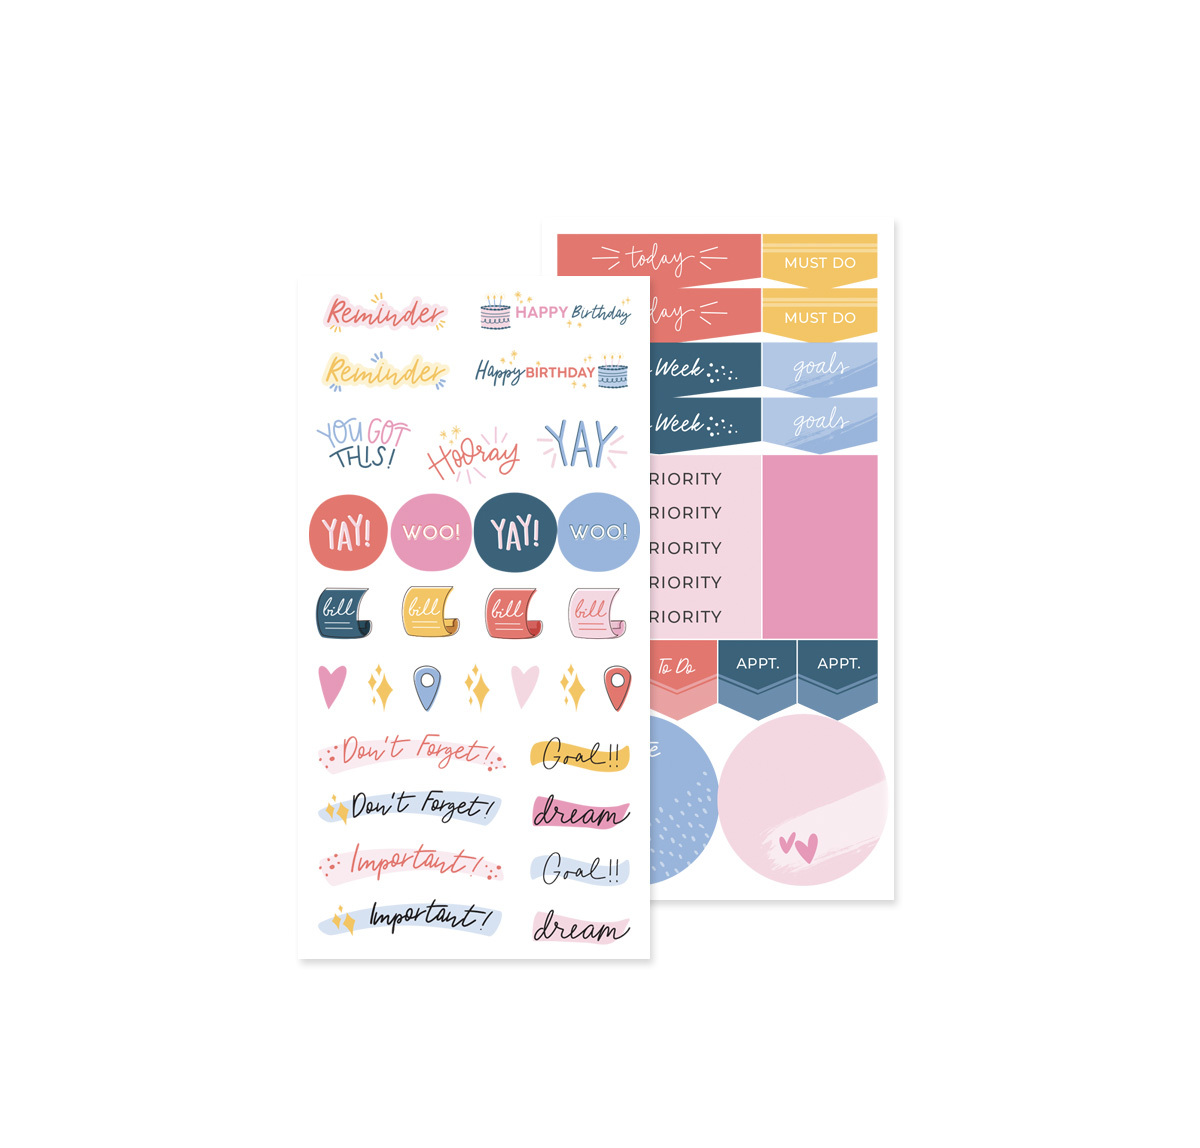 DON'T FORGET Stickers for Planner / Reminder Stickers / to Do